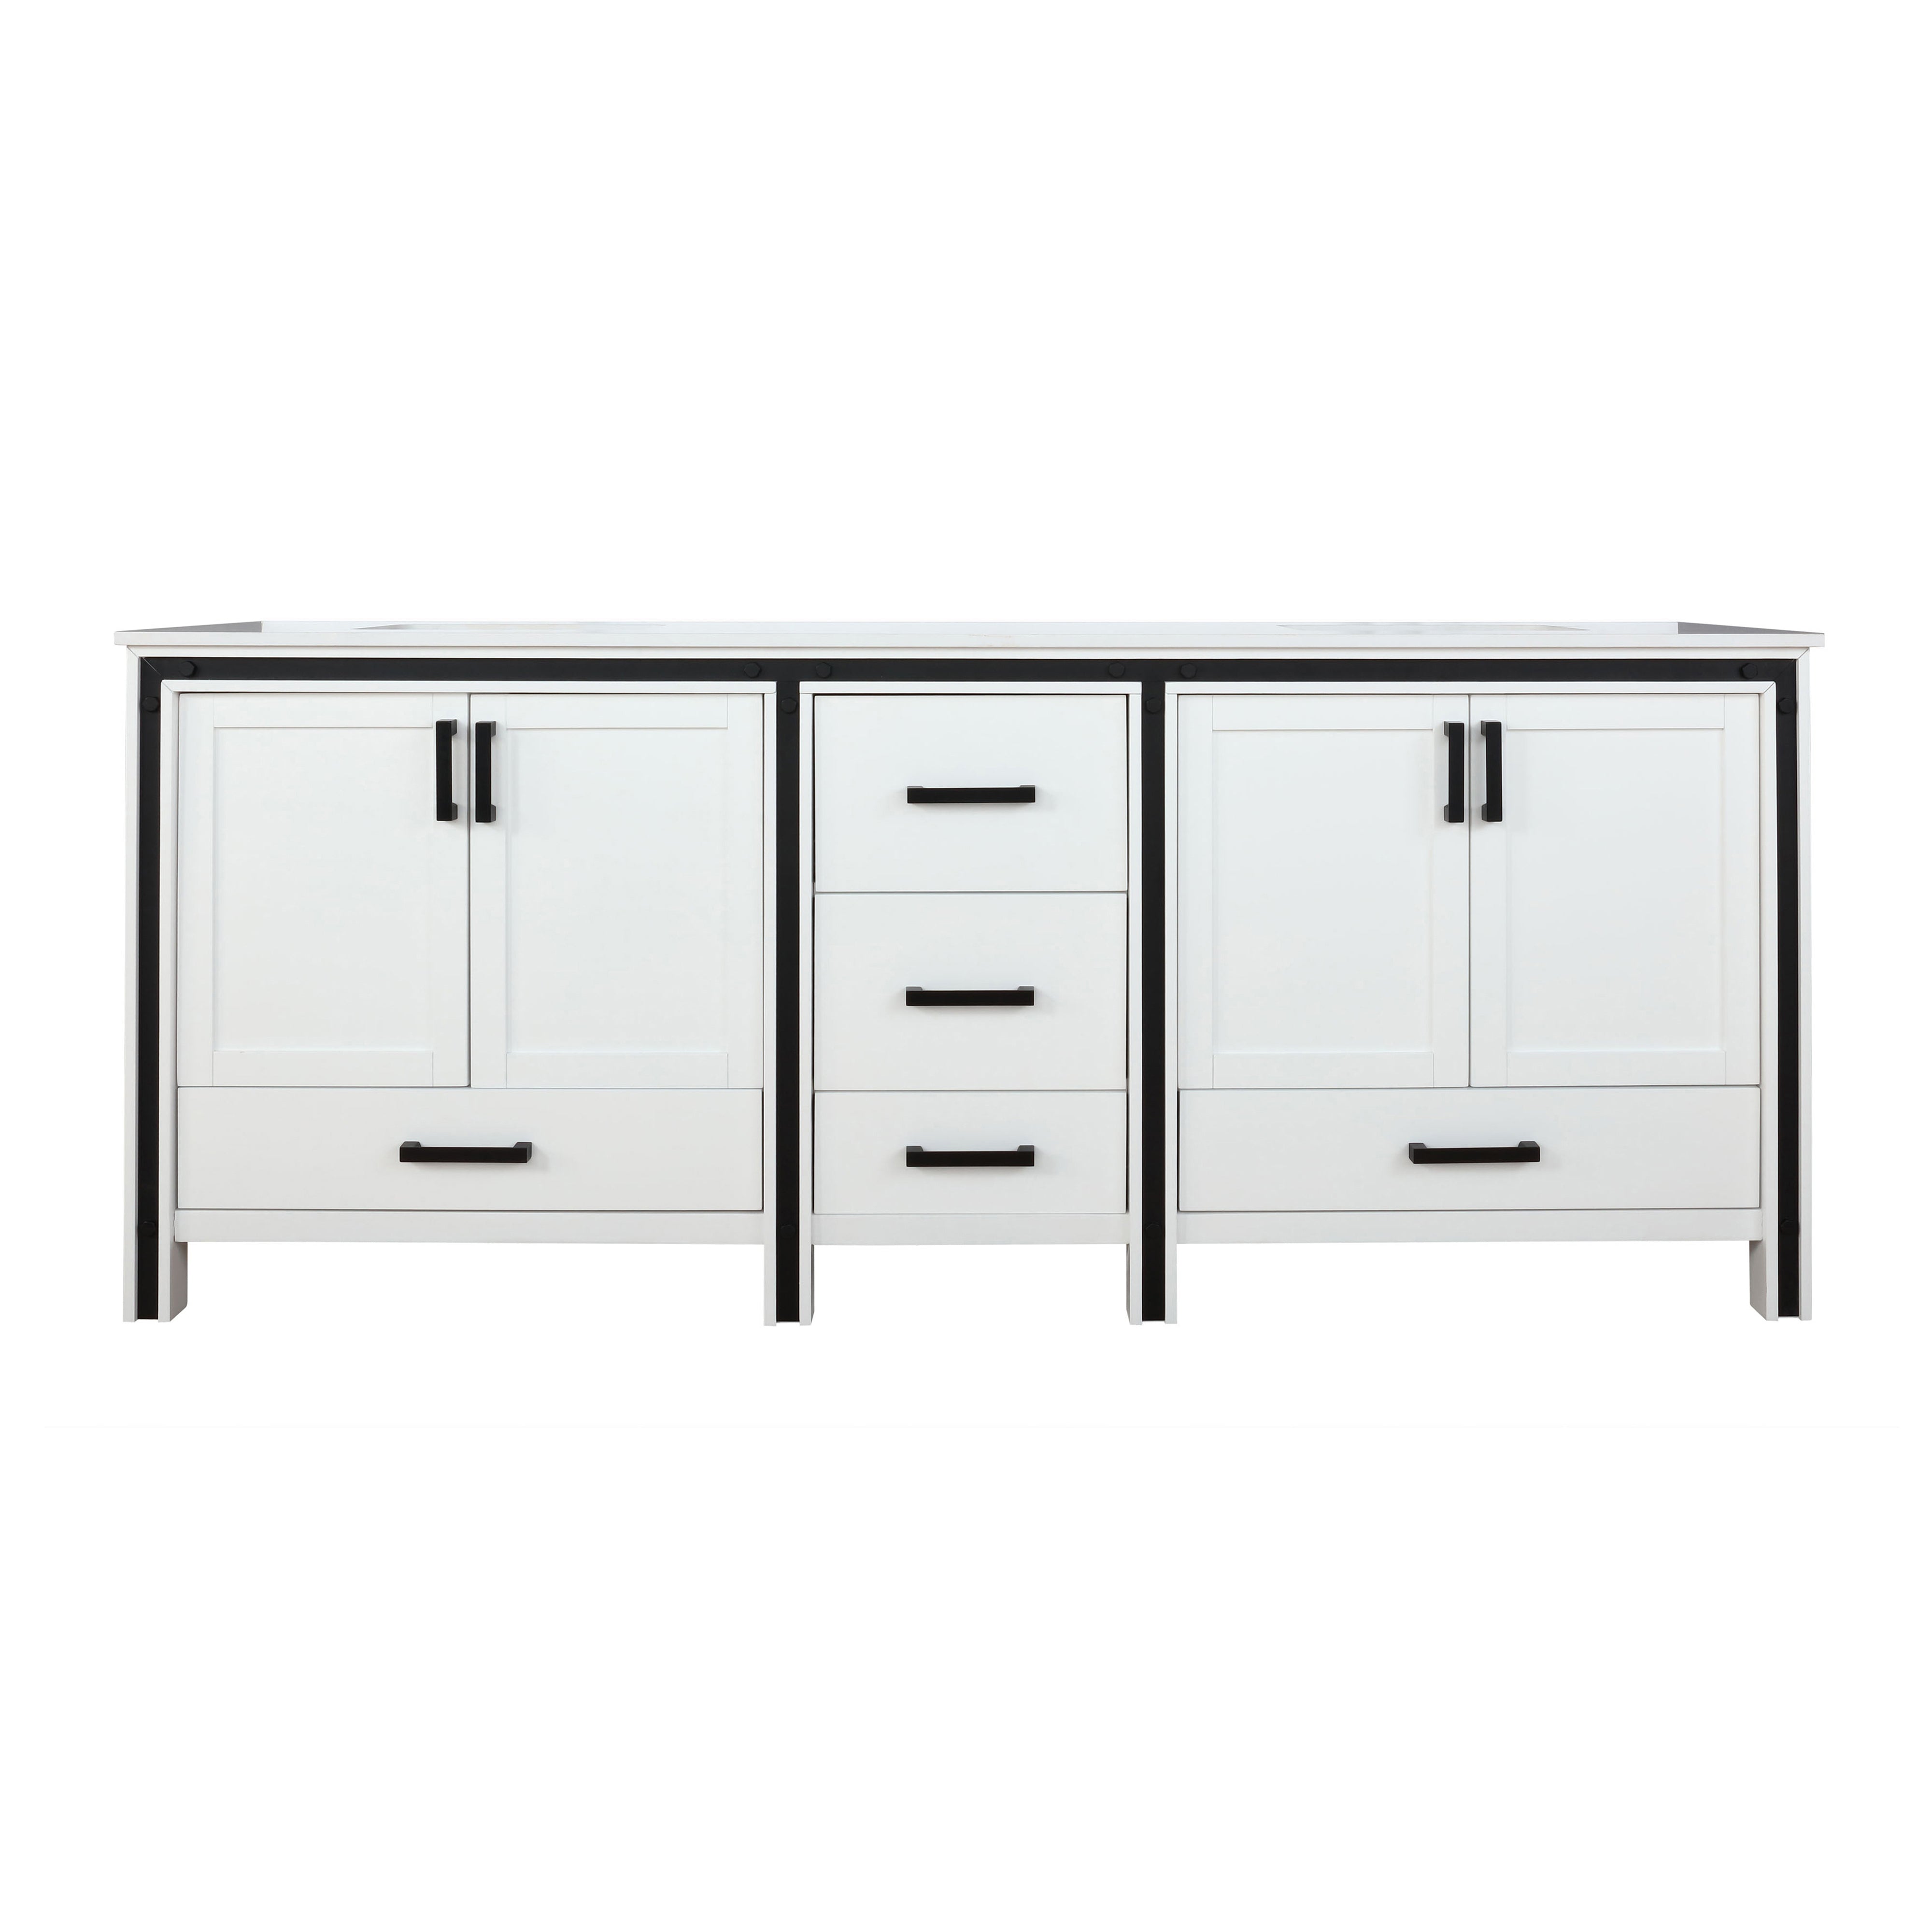 Lexora Ziva LZV352284SAJS000 84" Double Bathroom Vanity in White with Cultured Marble, White Rectangle Sinks, Front View